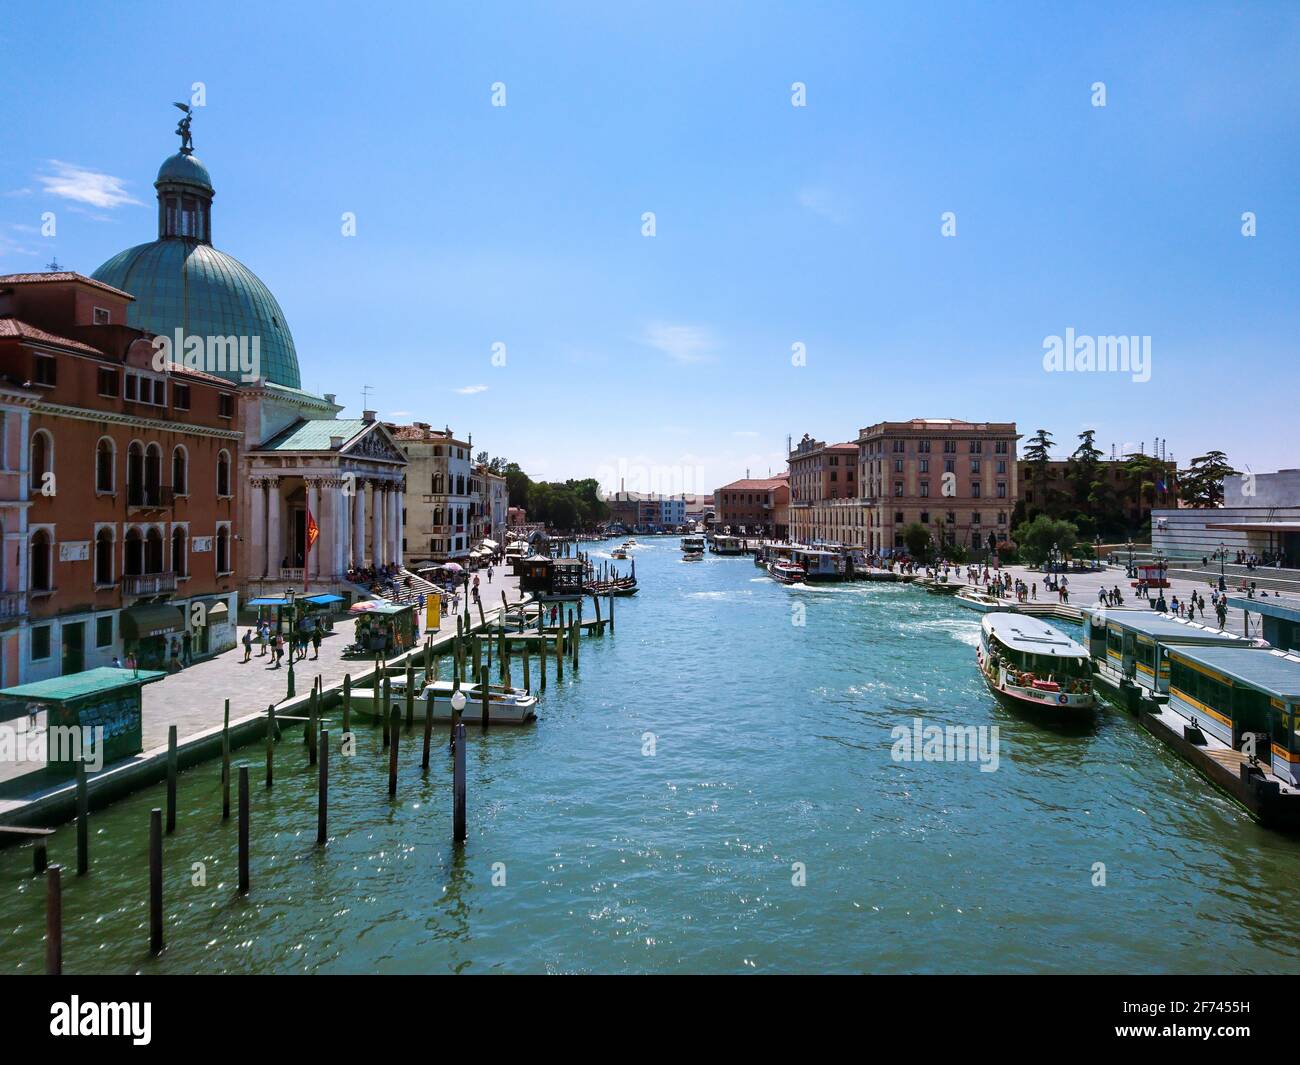 Venice, Italy - August 10, 2019: Grand canal near main train station and San Simeone Piccolo church with boats. Old buildings, blue water on sunny sum Stock Photo